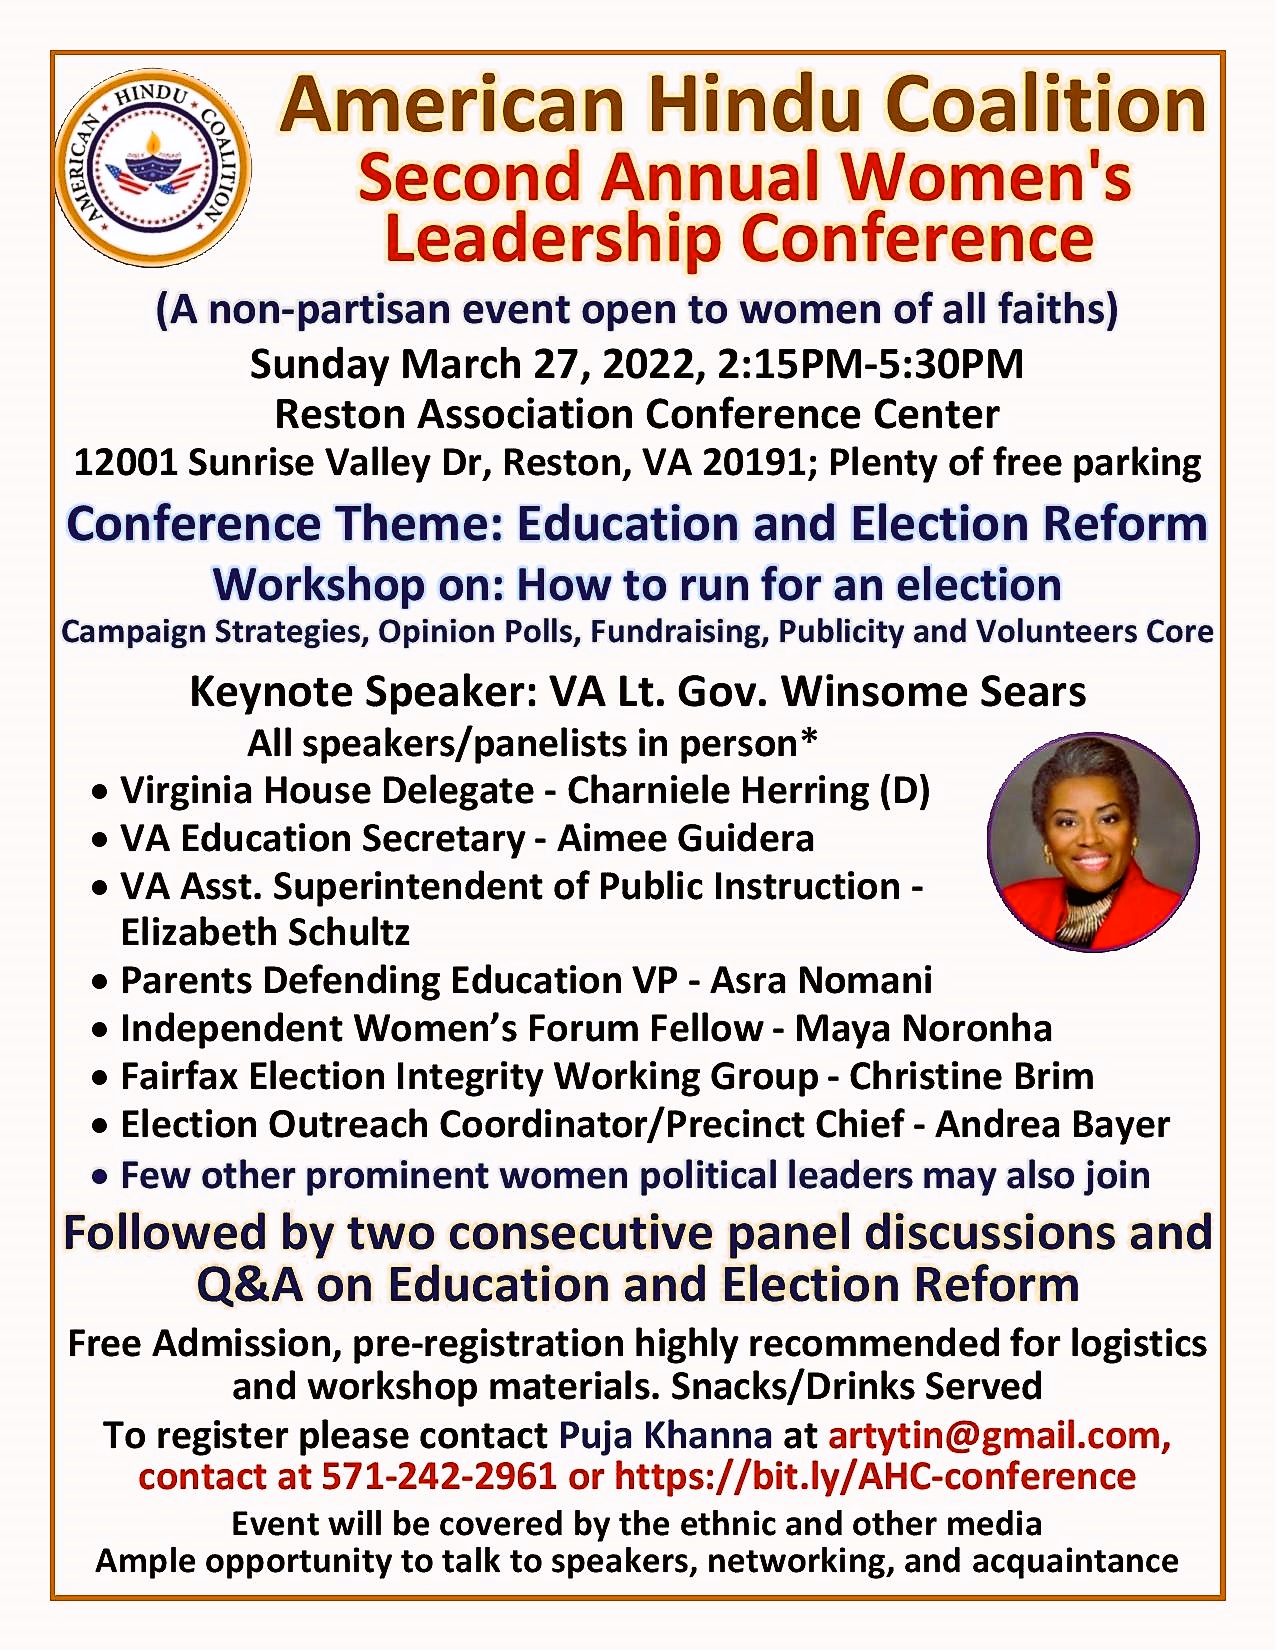 American Hindu Coalition Second Annual Women’s Leadership Conference